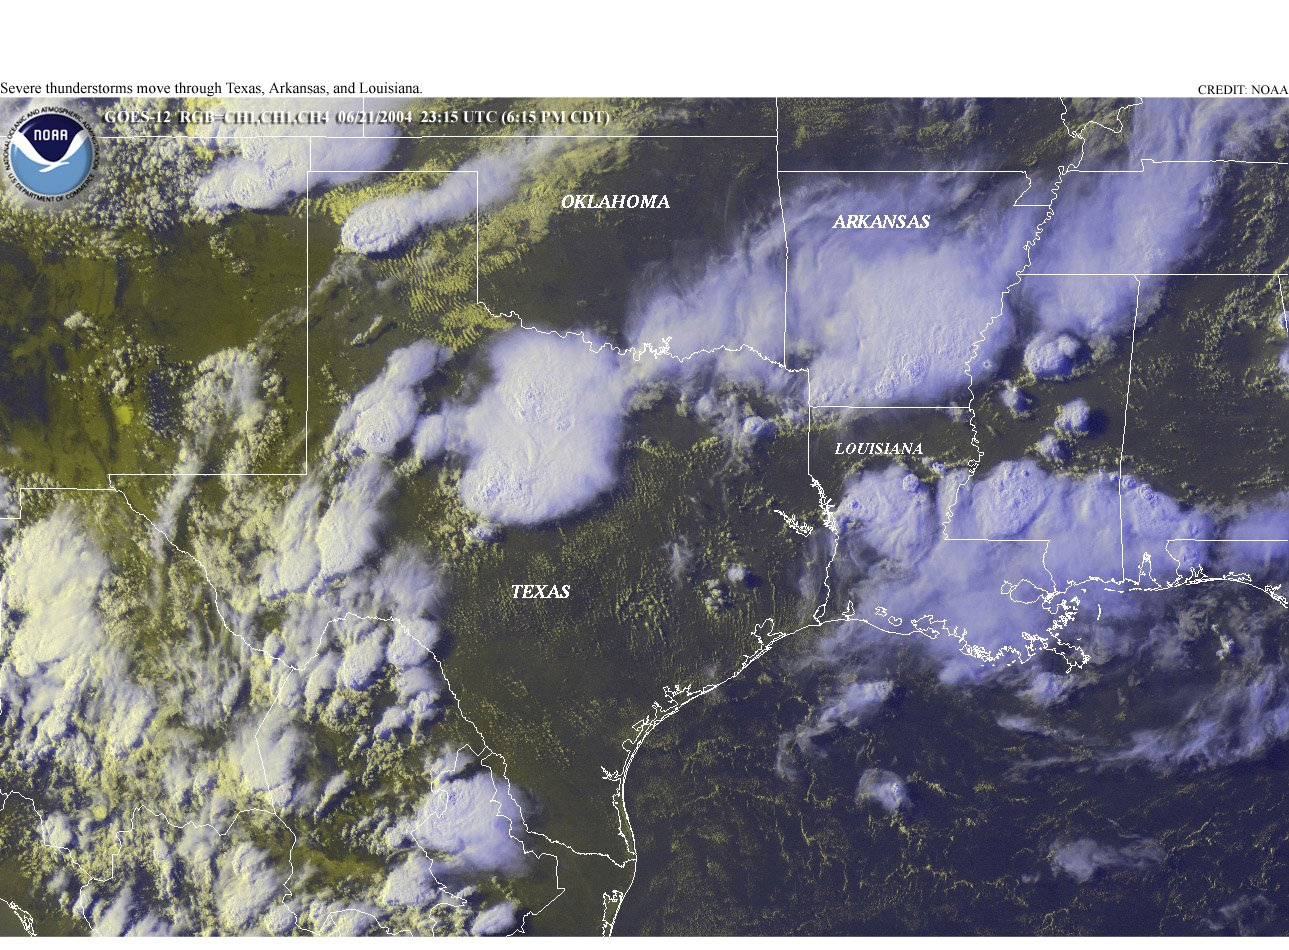 Large thunderstorms occurring from New Mexico to western Florida